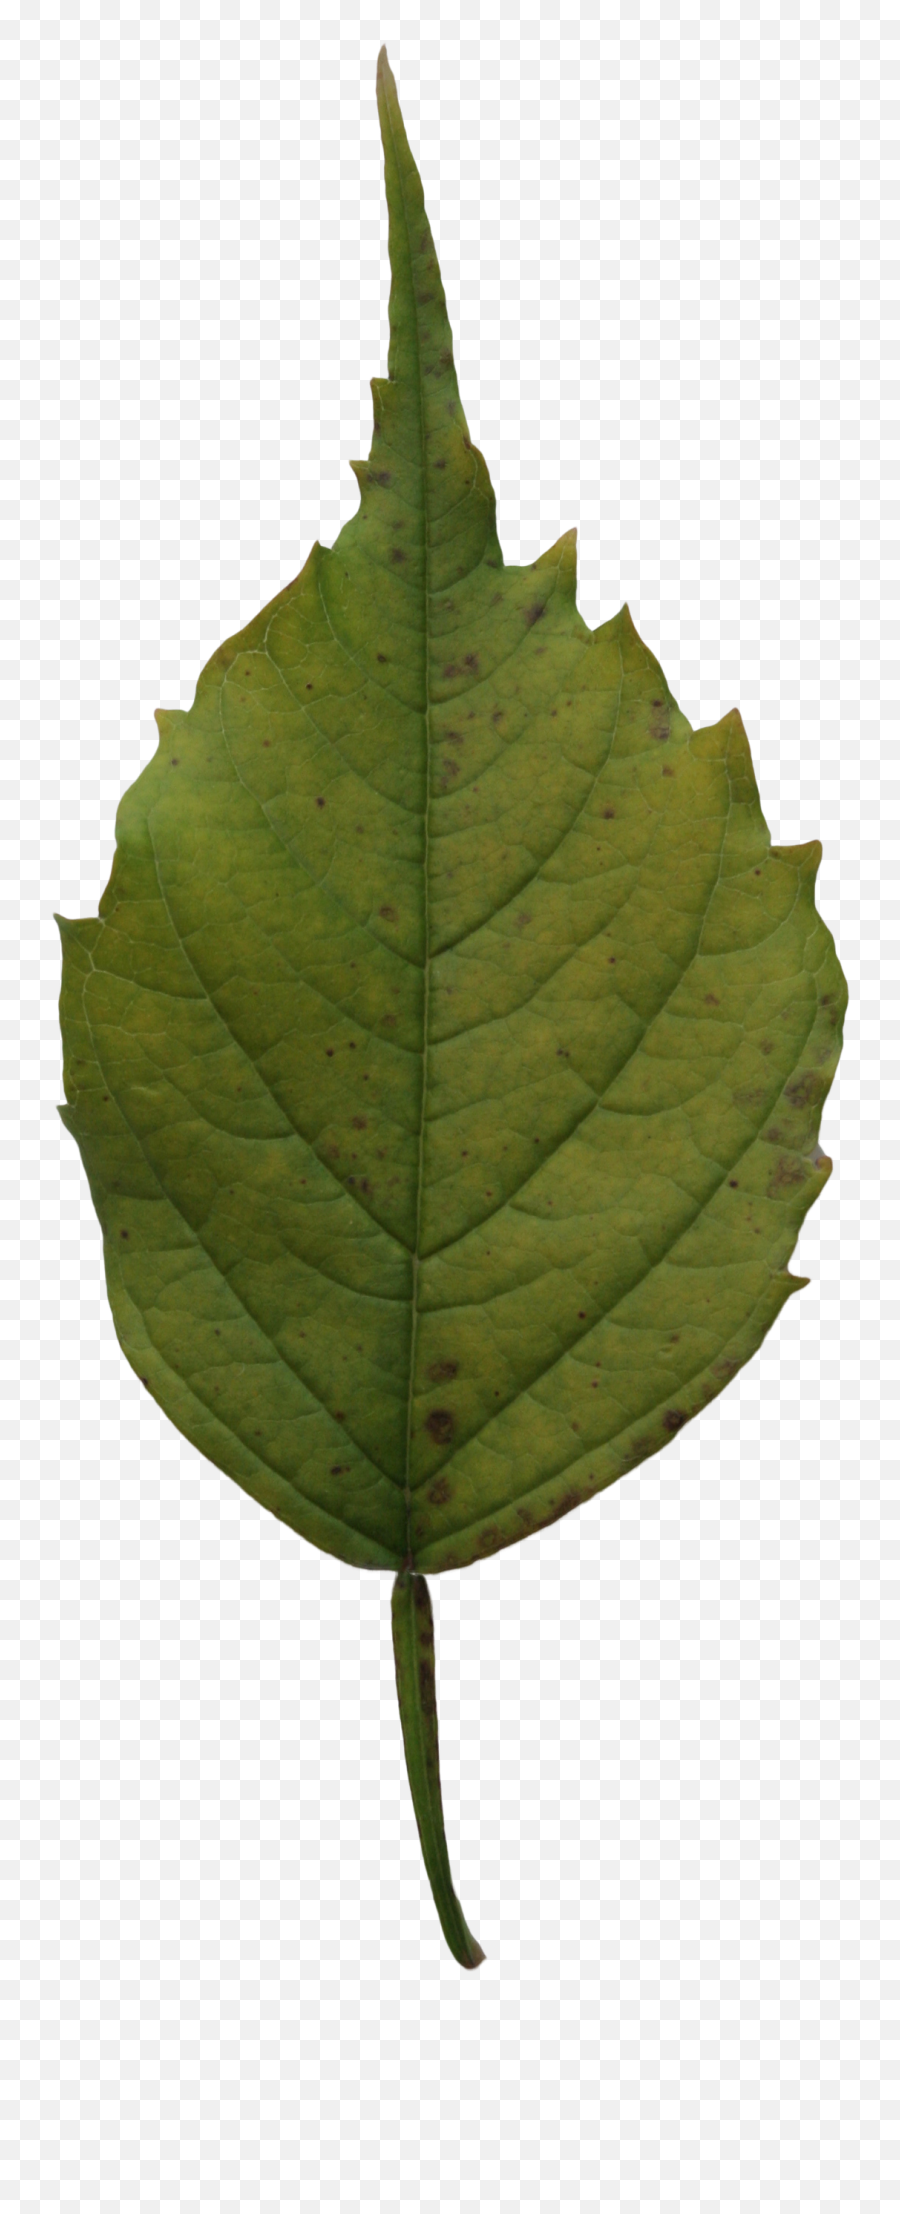 Dark Yellow Leaf Free Cut Out People Trees And Leaves Emoji,Green Leaf Png